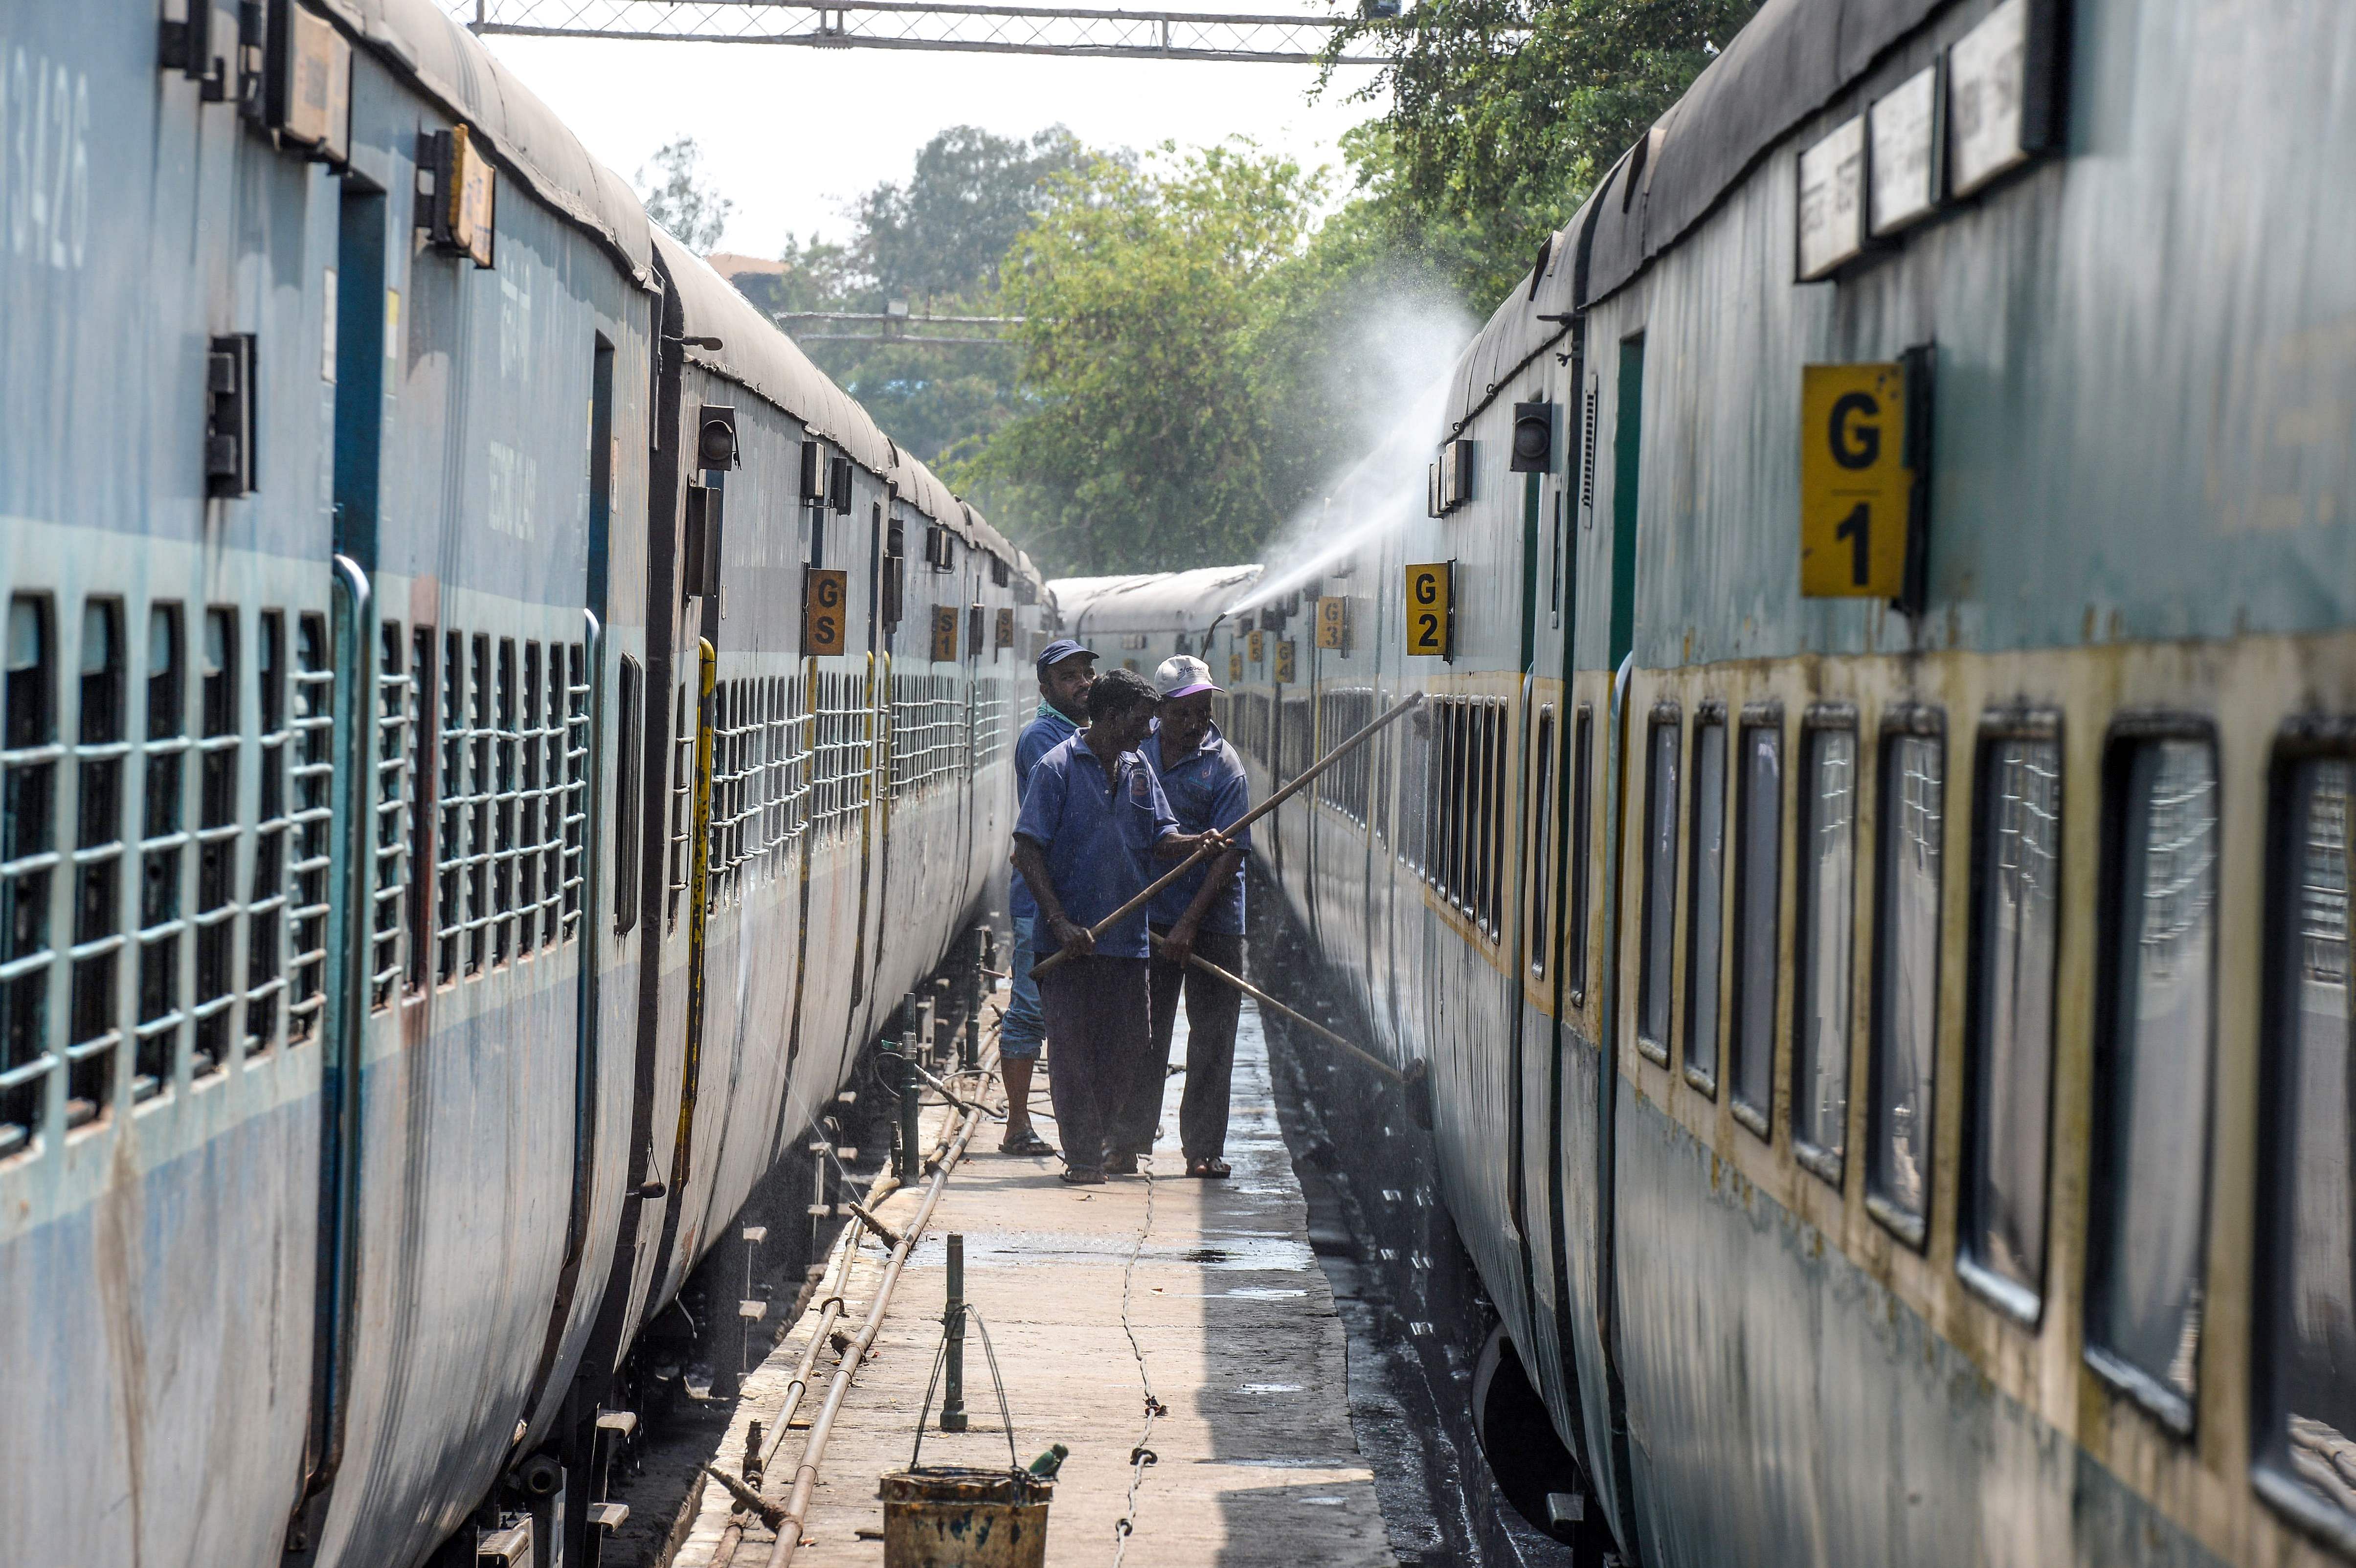 Workers clean the coaches of a train amid concerns over the spread of the COVID-19 novel coronavirus at a railway station in Secunderabad, the twin city of Hyderabad. (AFP Photo)